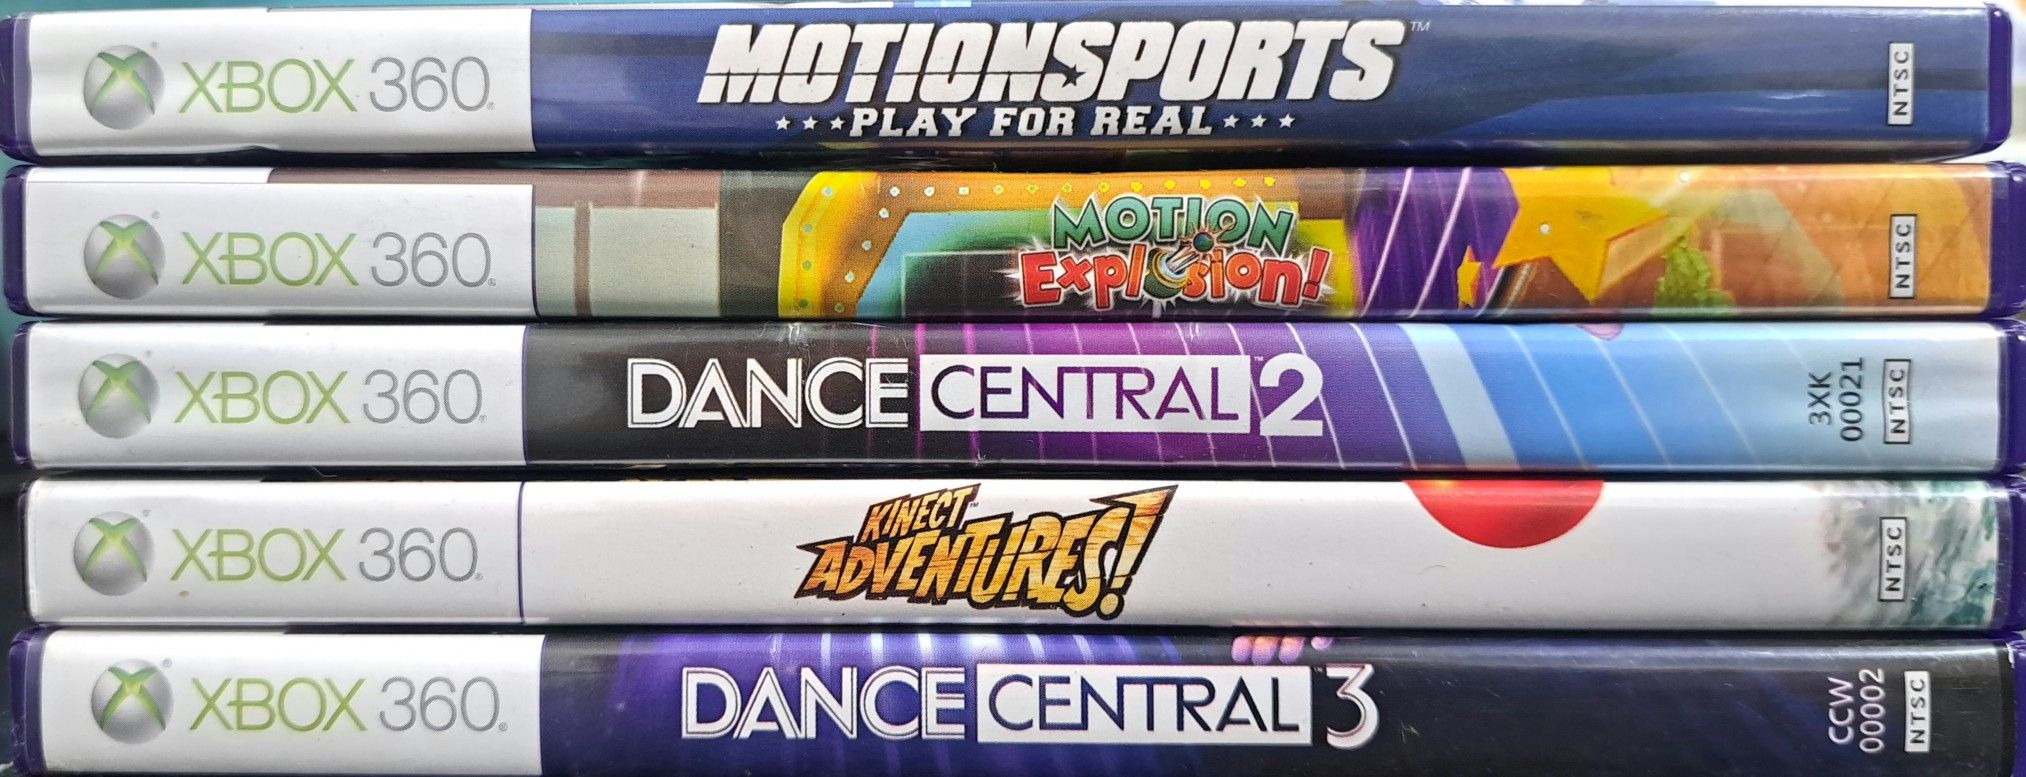 Xbox 360 Kinect Games